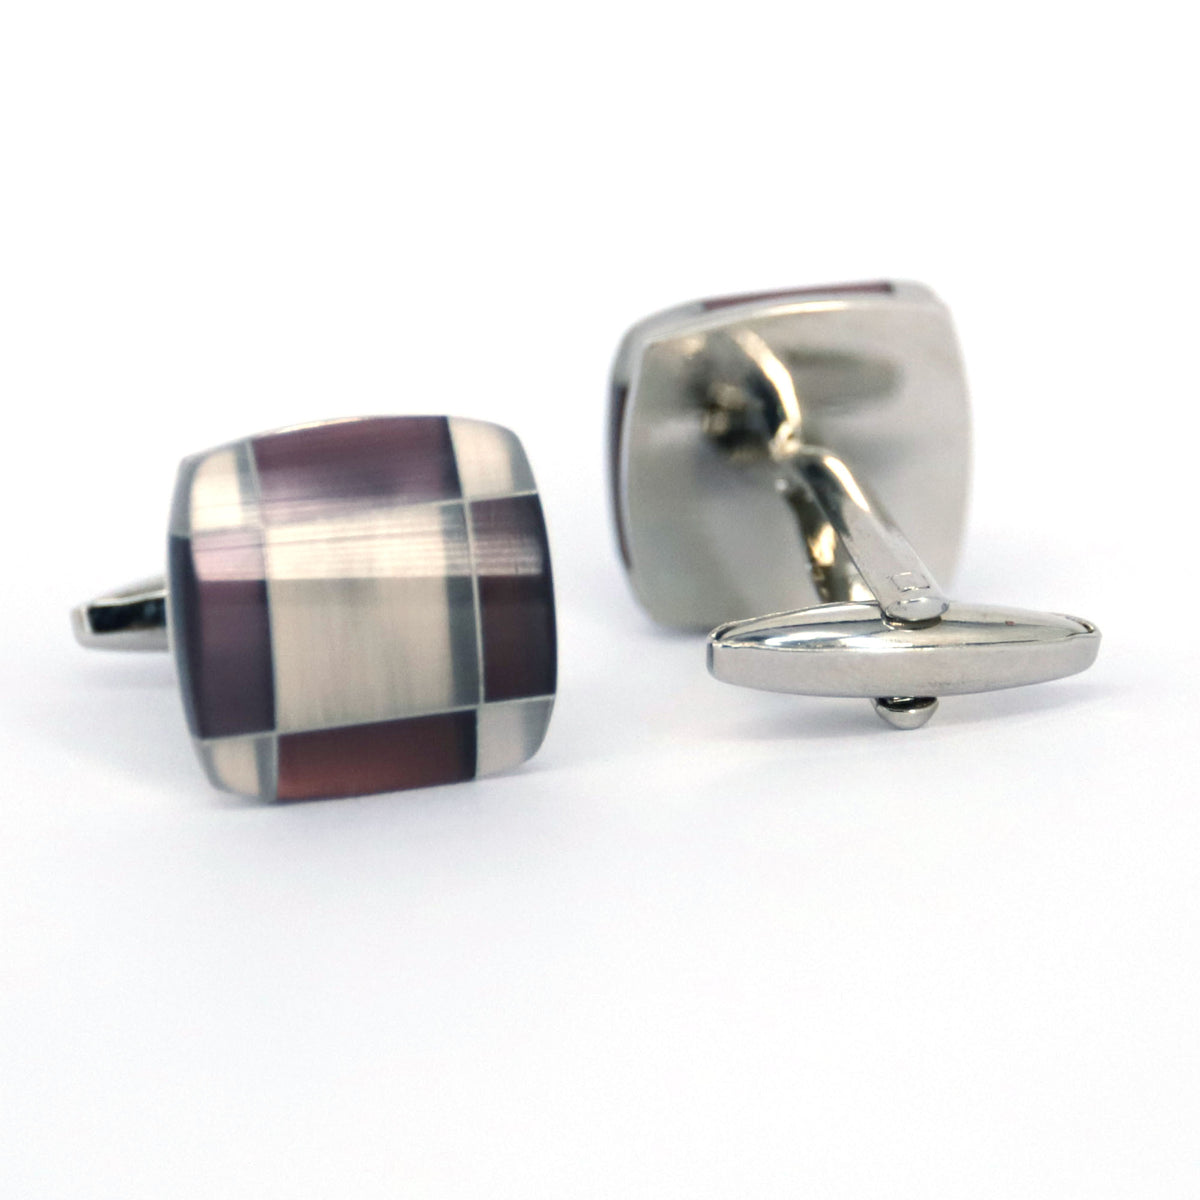 Fiber Glass Rectangle cufflinks in Purple and Silver (Online Exclusive)